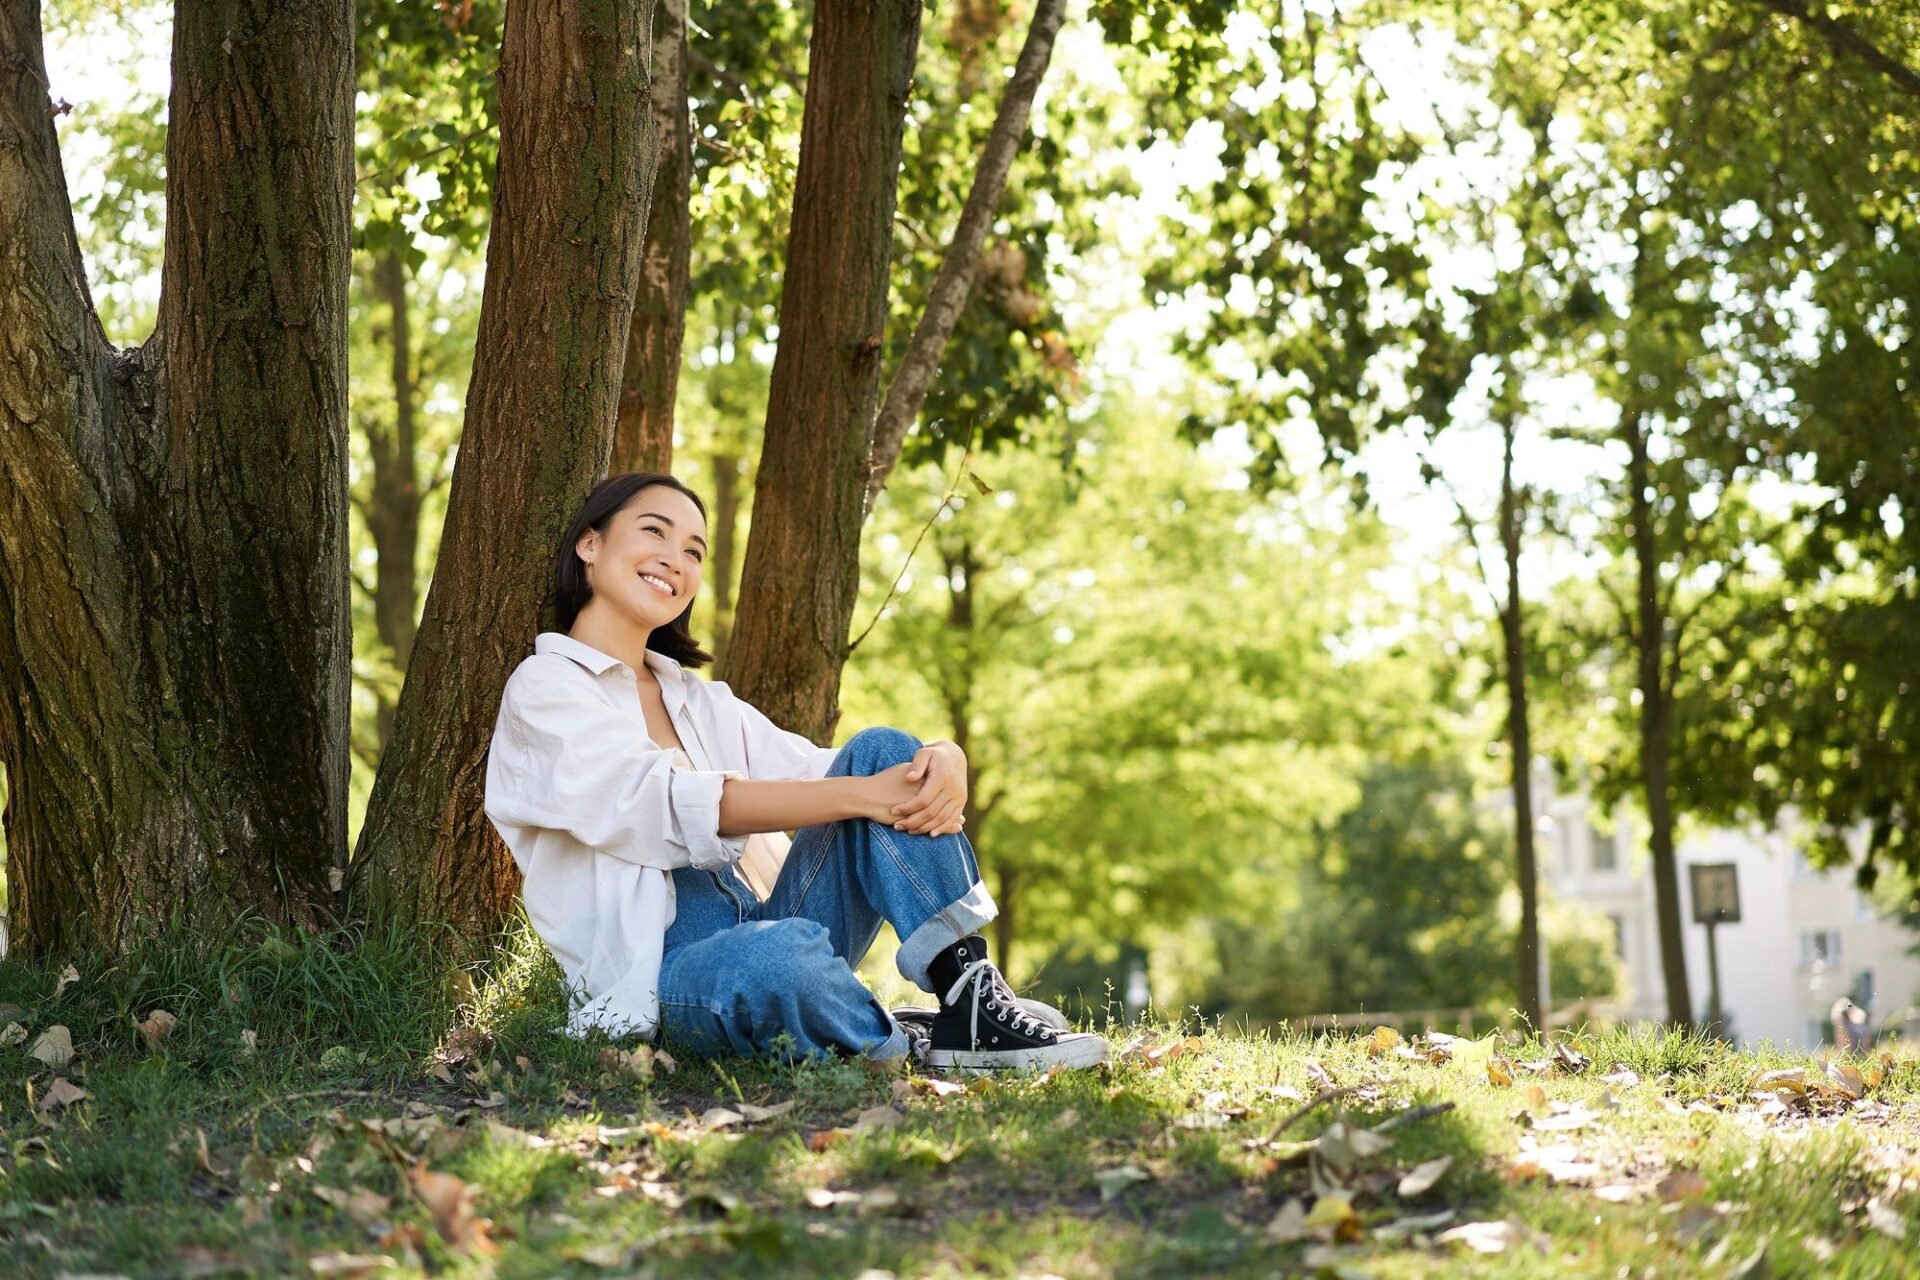 Therapeutic Benefits of the Outdoors